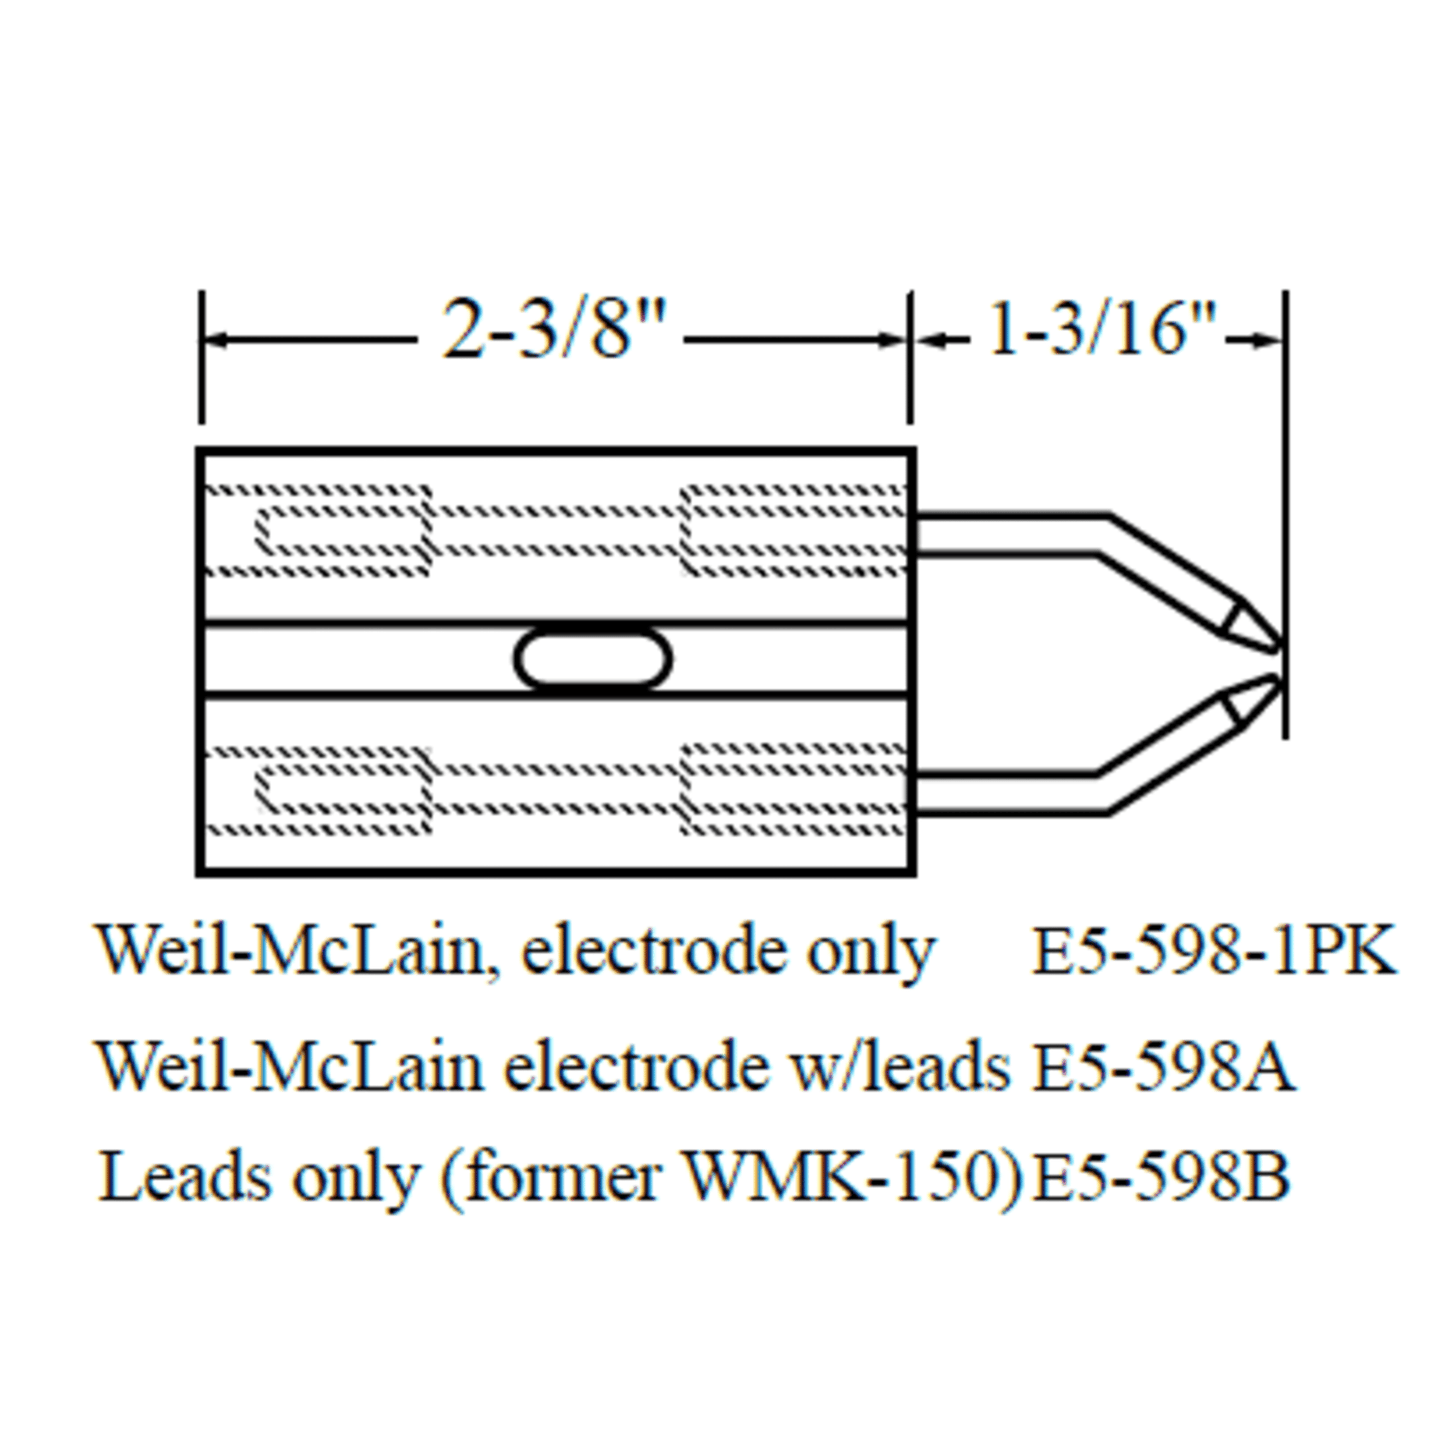 Westwood 598B, Leads only - Weil-McLain Electrode E5-598